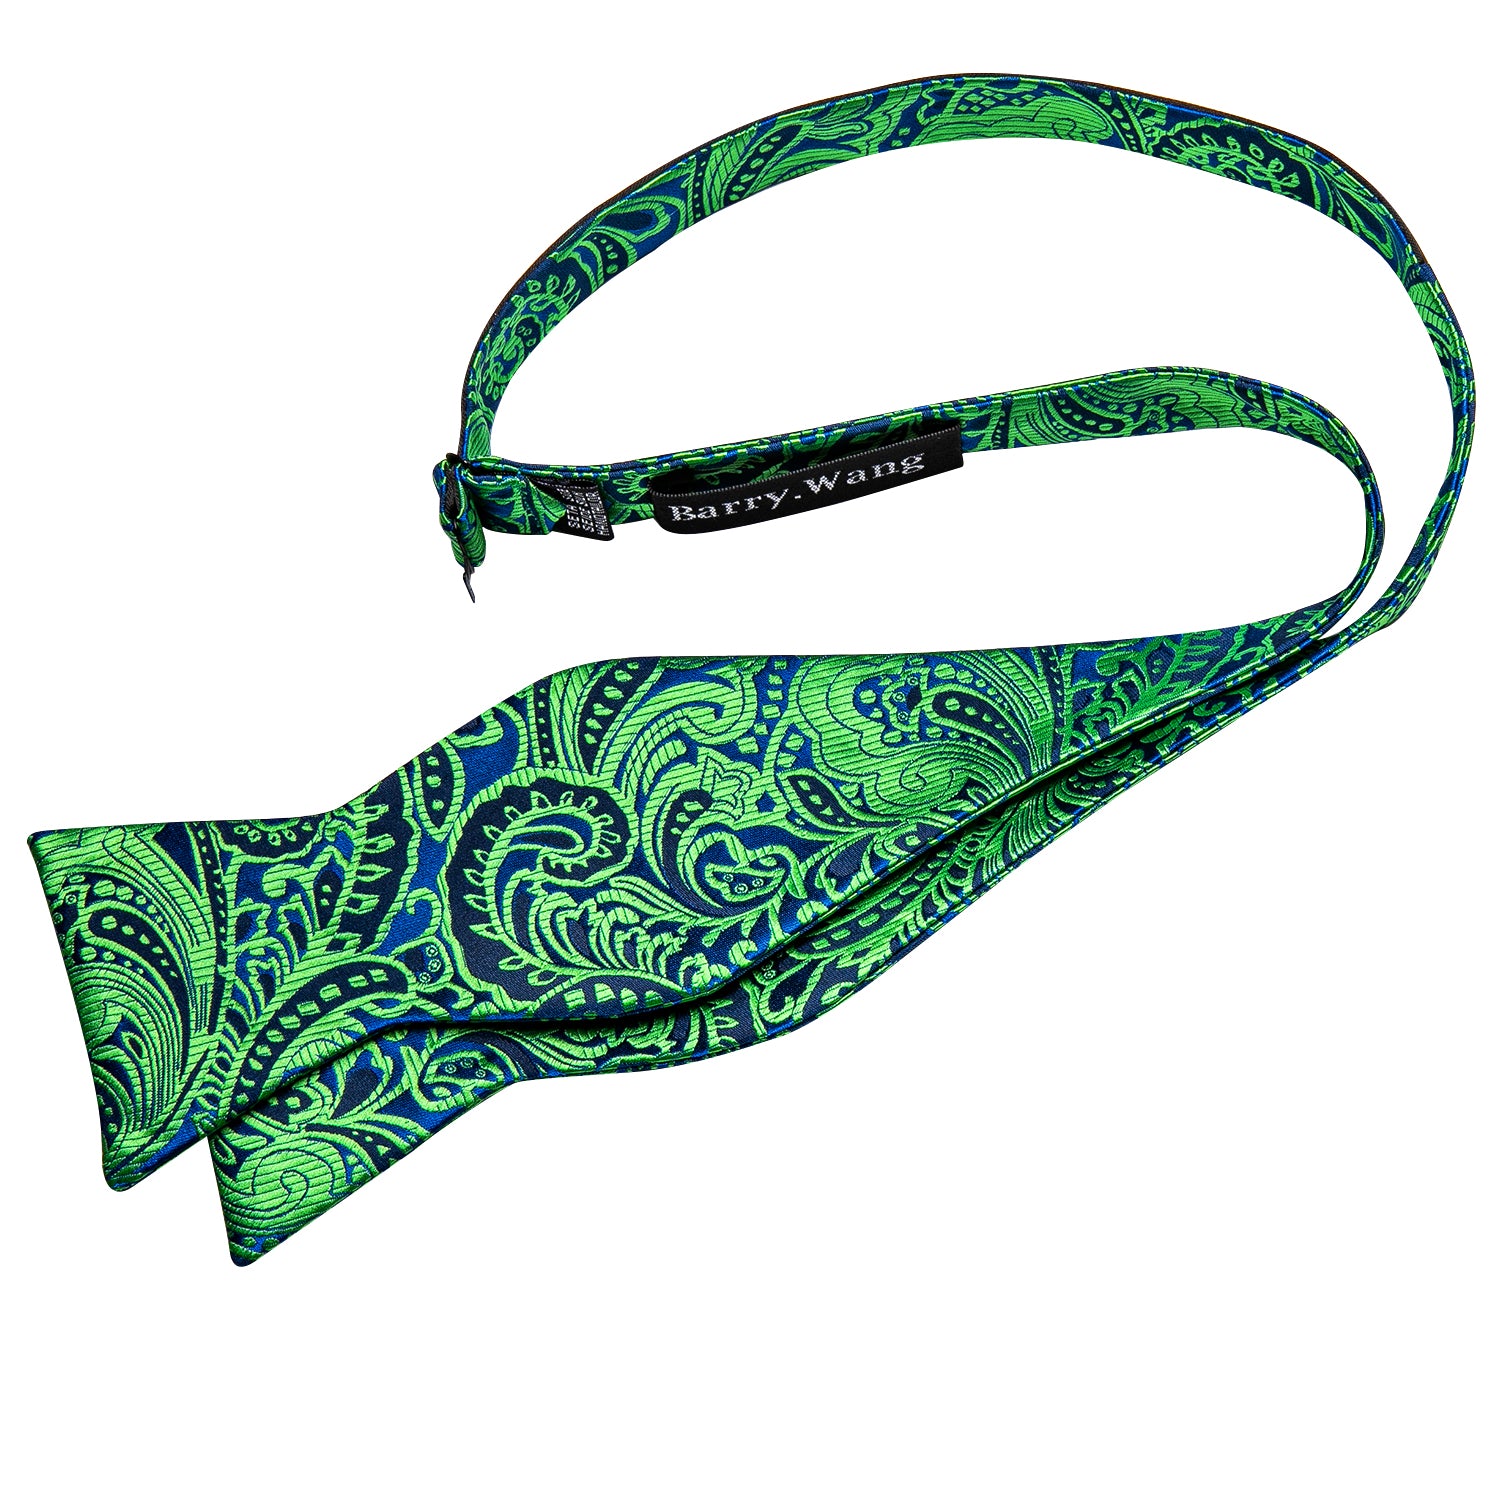 Barry.wang Floral Tie Green Navy Paisley Bow Tie Hanky Cufflinks Set